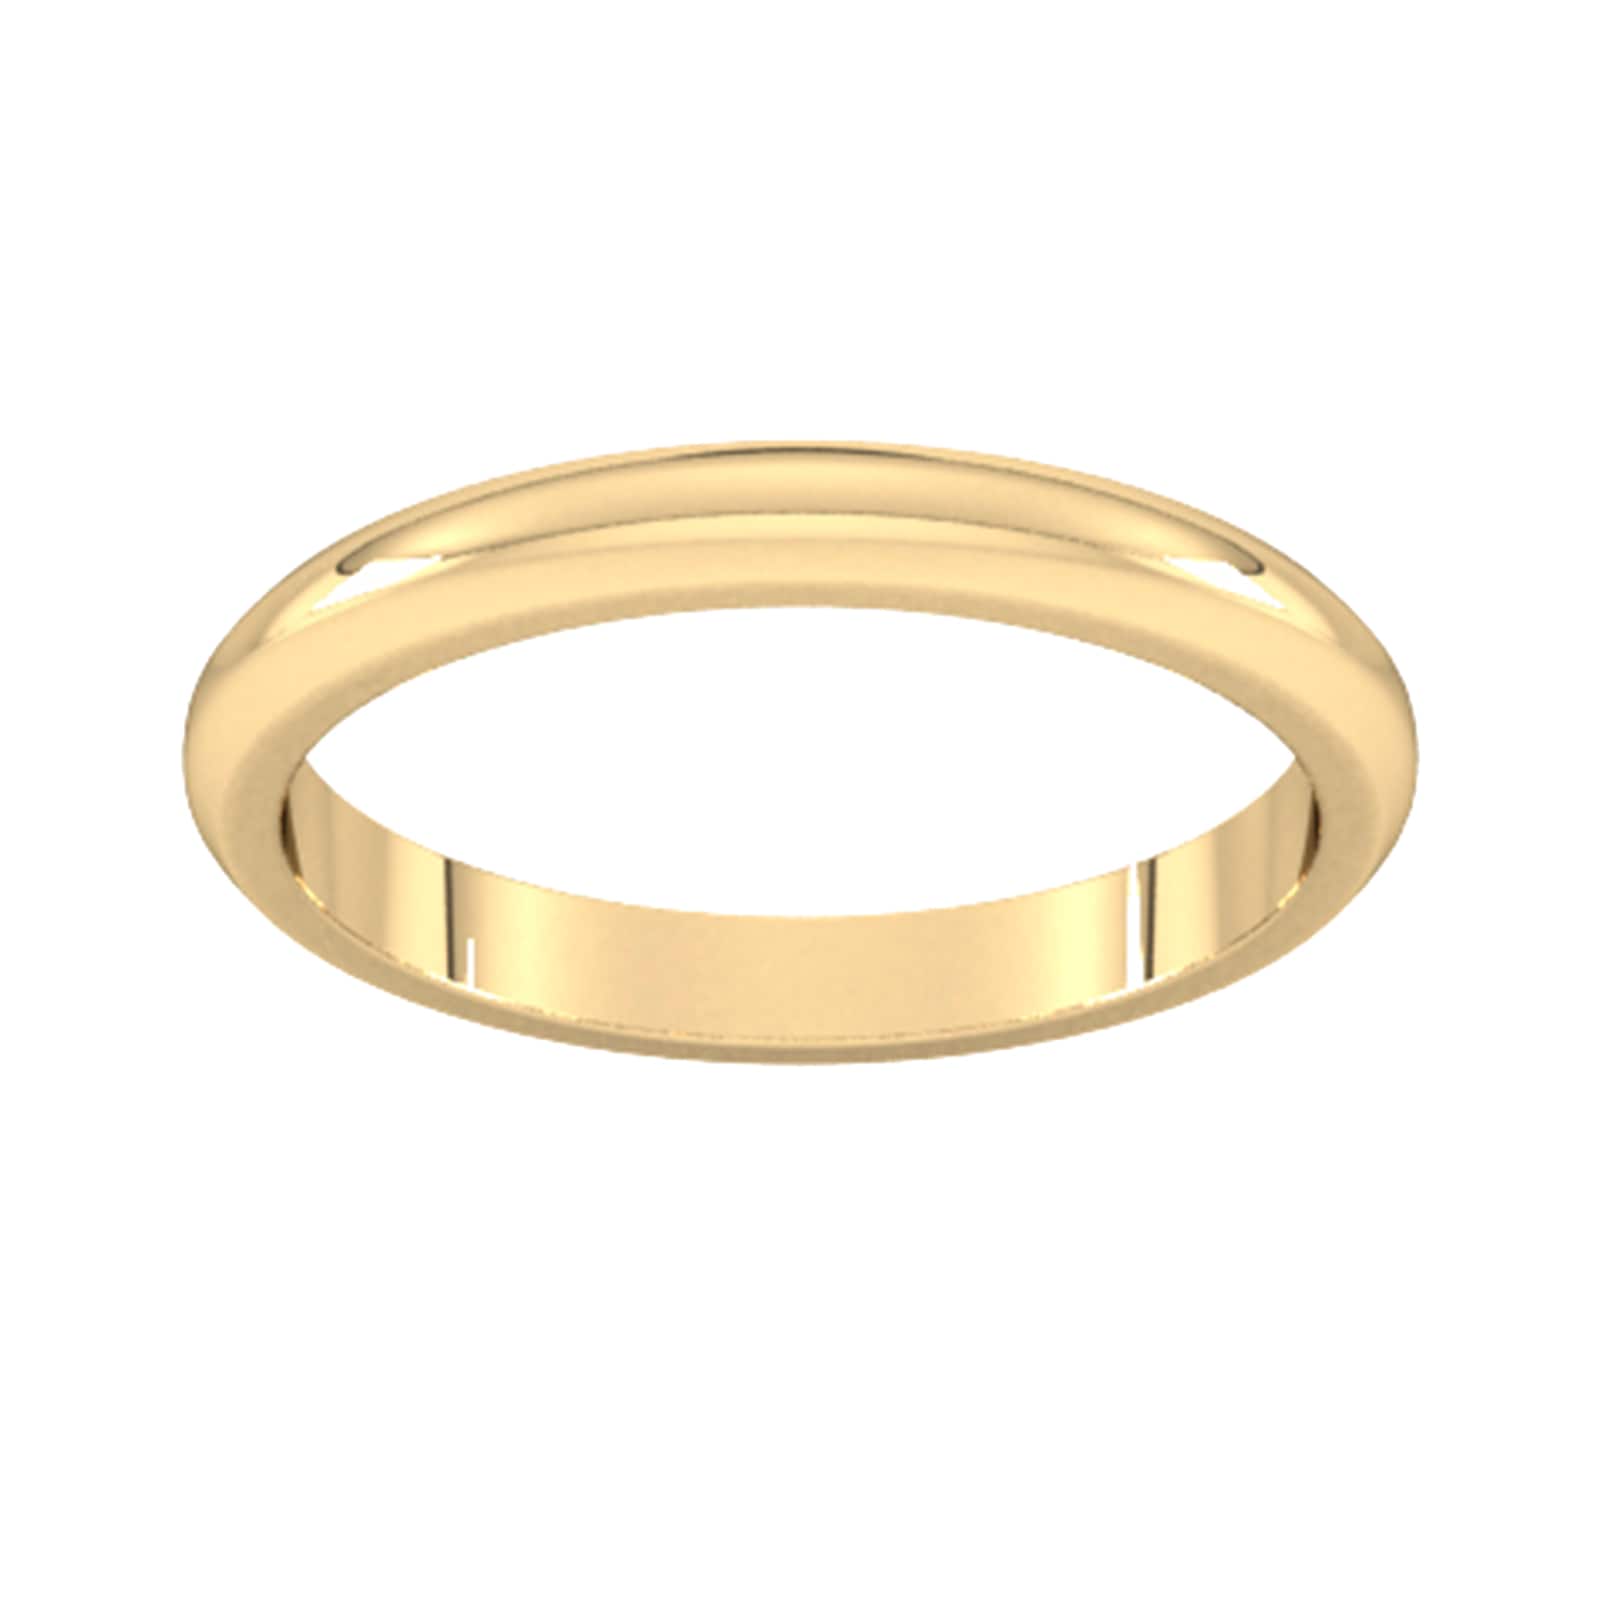 2.5mm D Shape Heavy Wedding Ring In 18 Carat Yellow Gold - Ring Size K